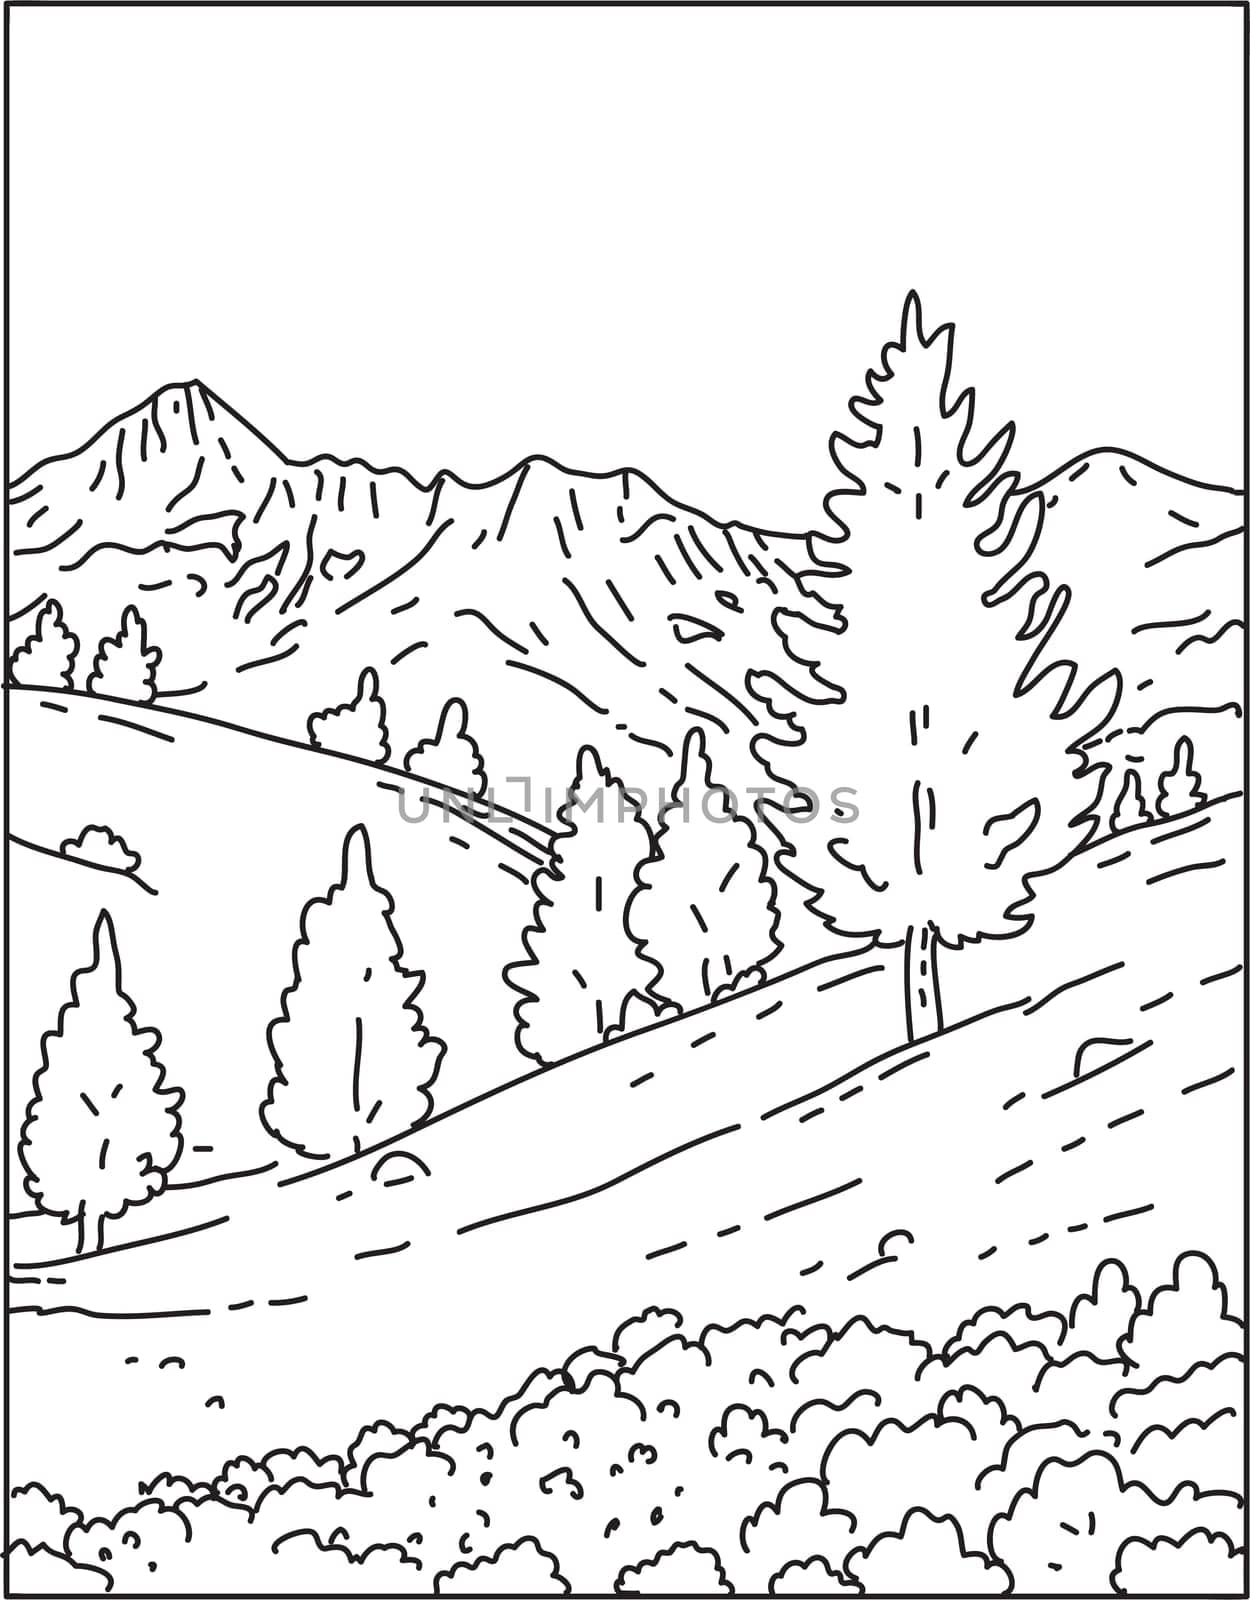 Mono line illustration of Mercantour National Park or Parc national du Mercantour located in the Alpes-de-Haute-Provence and Alpes-Maritimes departments in France done in monoline line art style.
